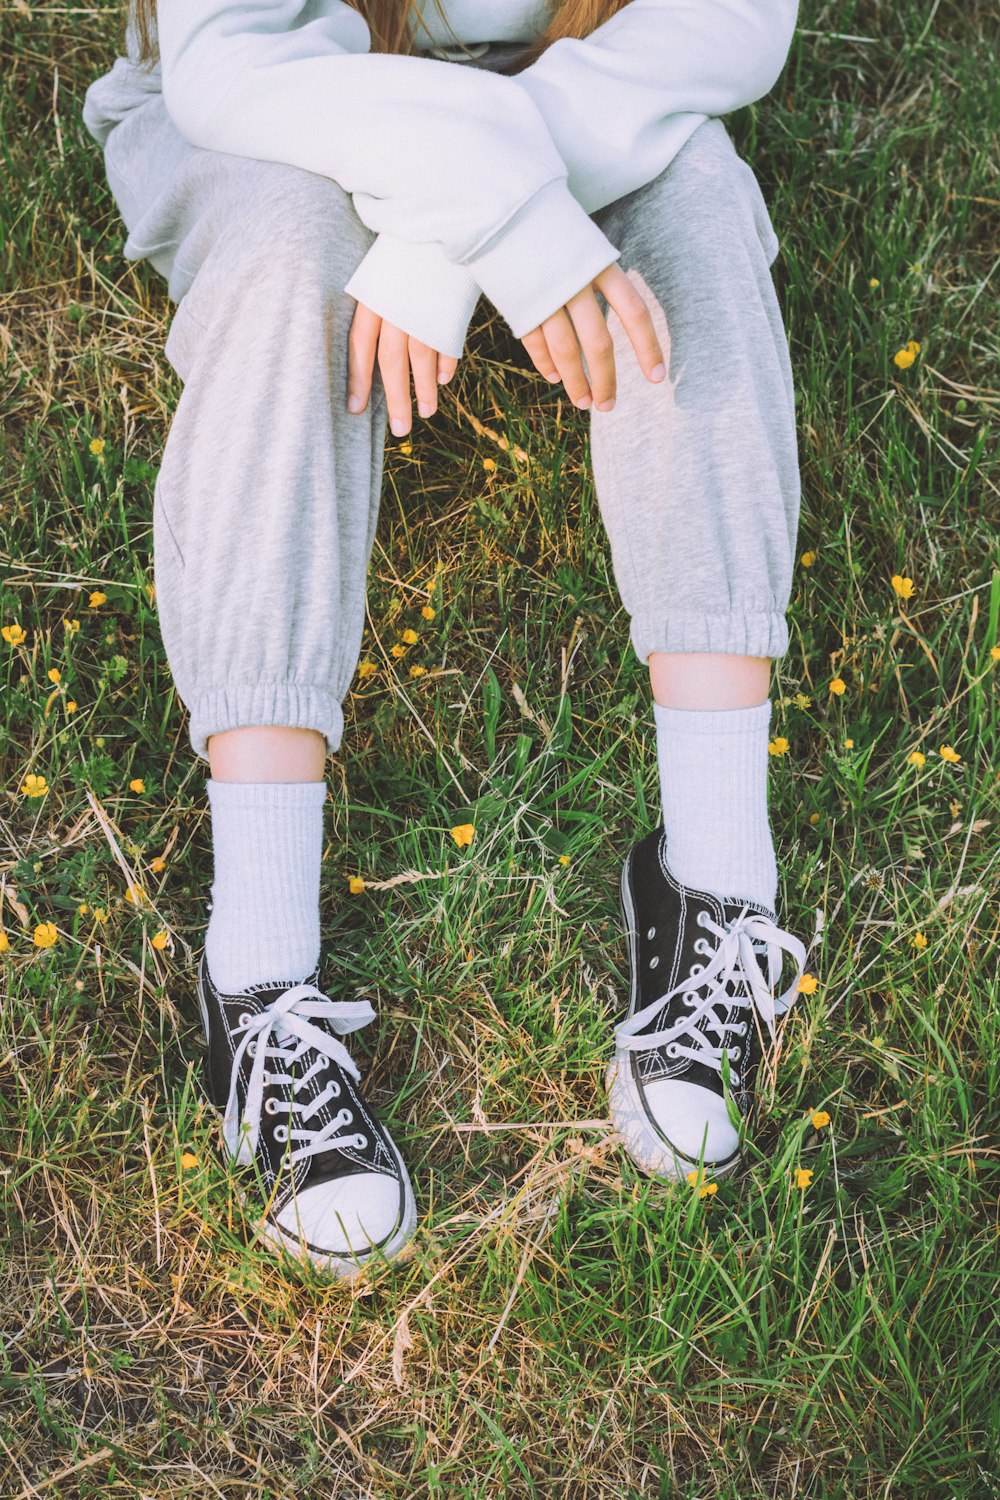 a person's legs and feet in a grassy area